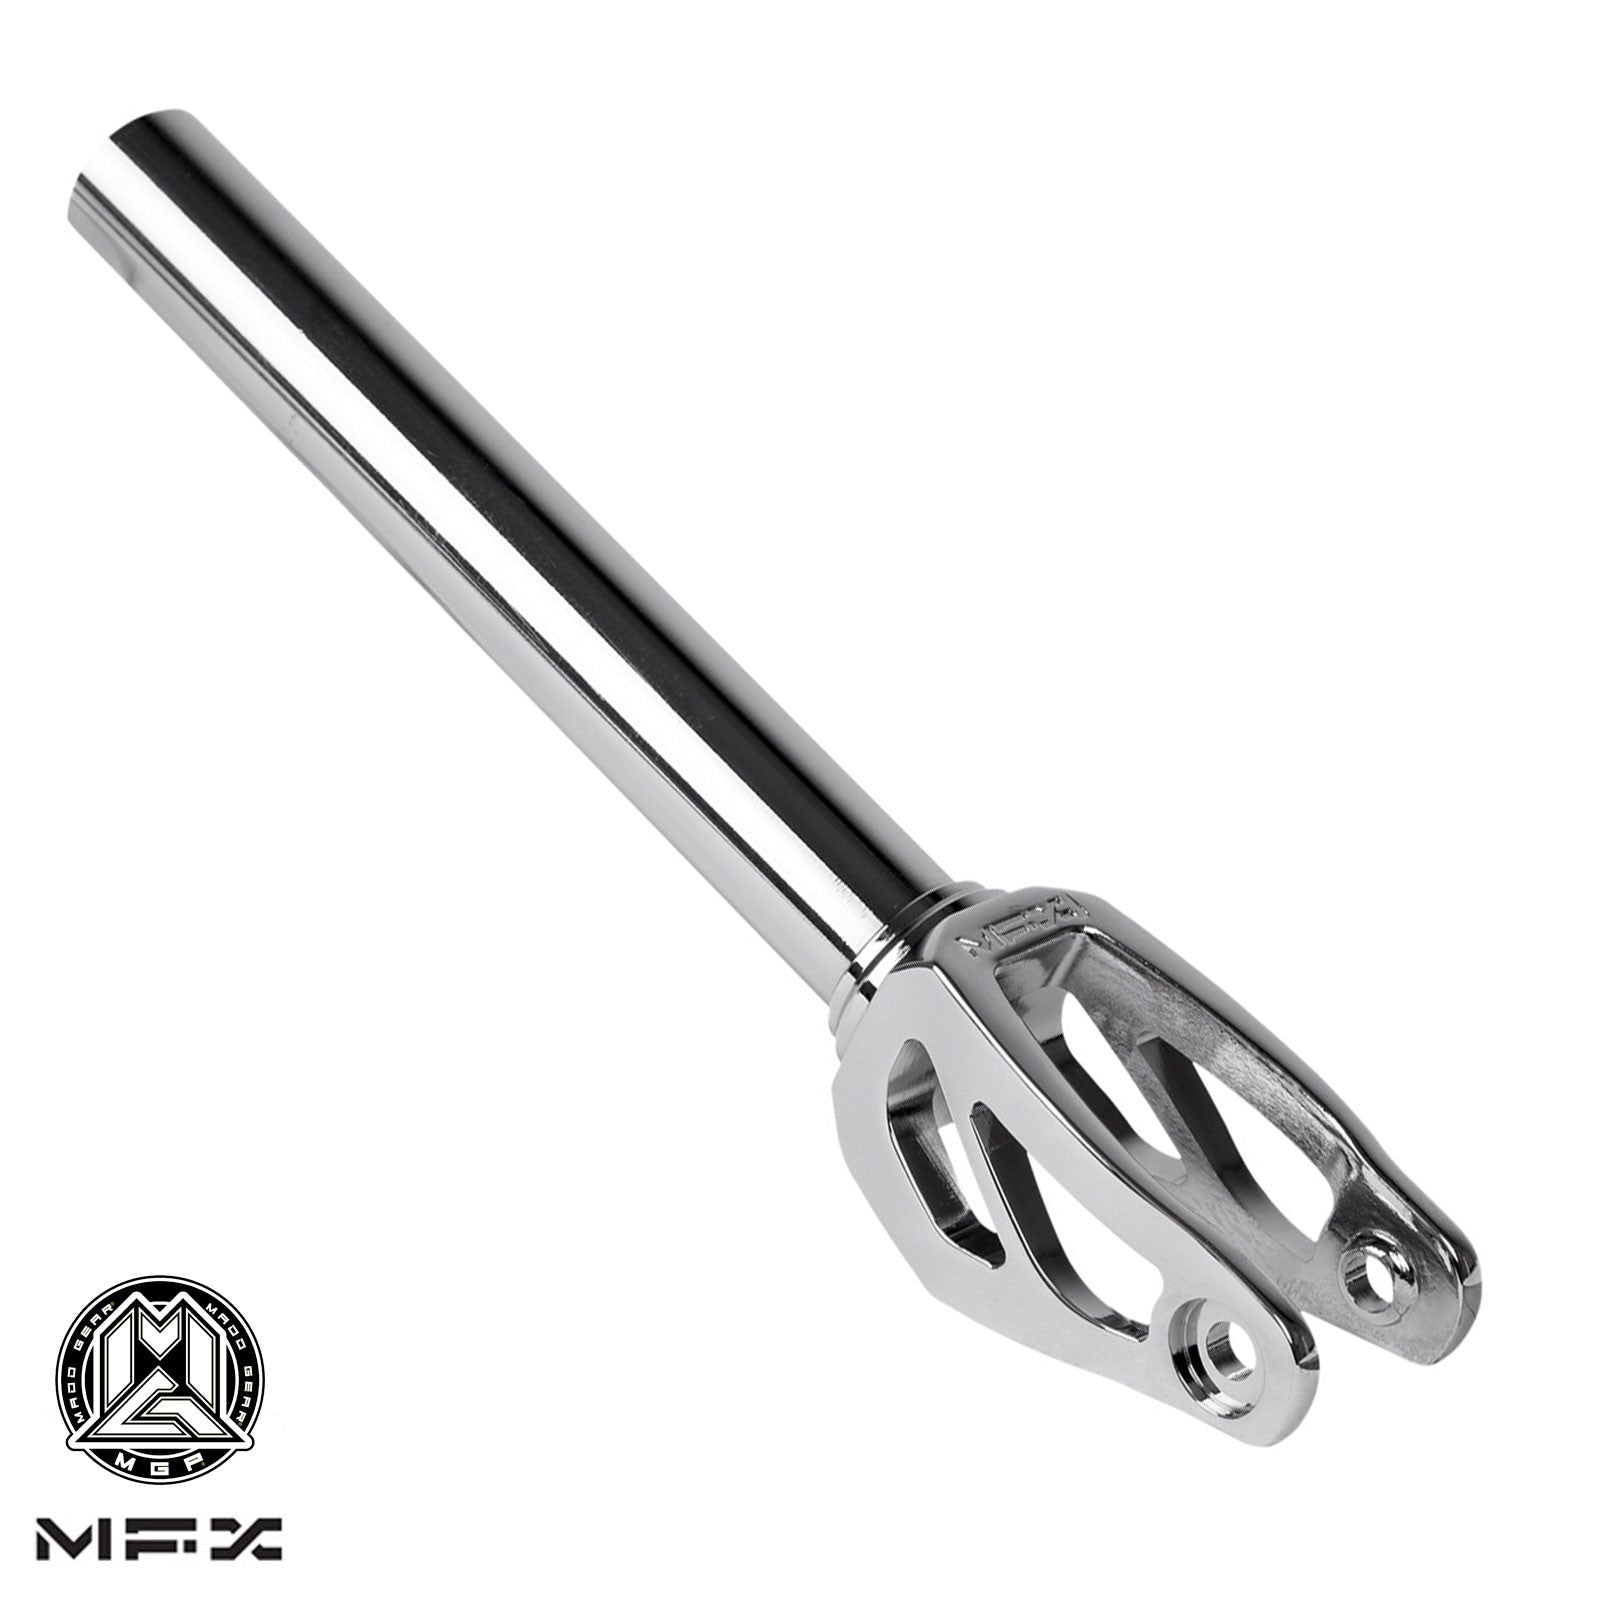 Scooter fork for freestyle scooter, Chrome